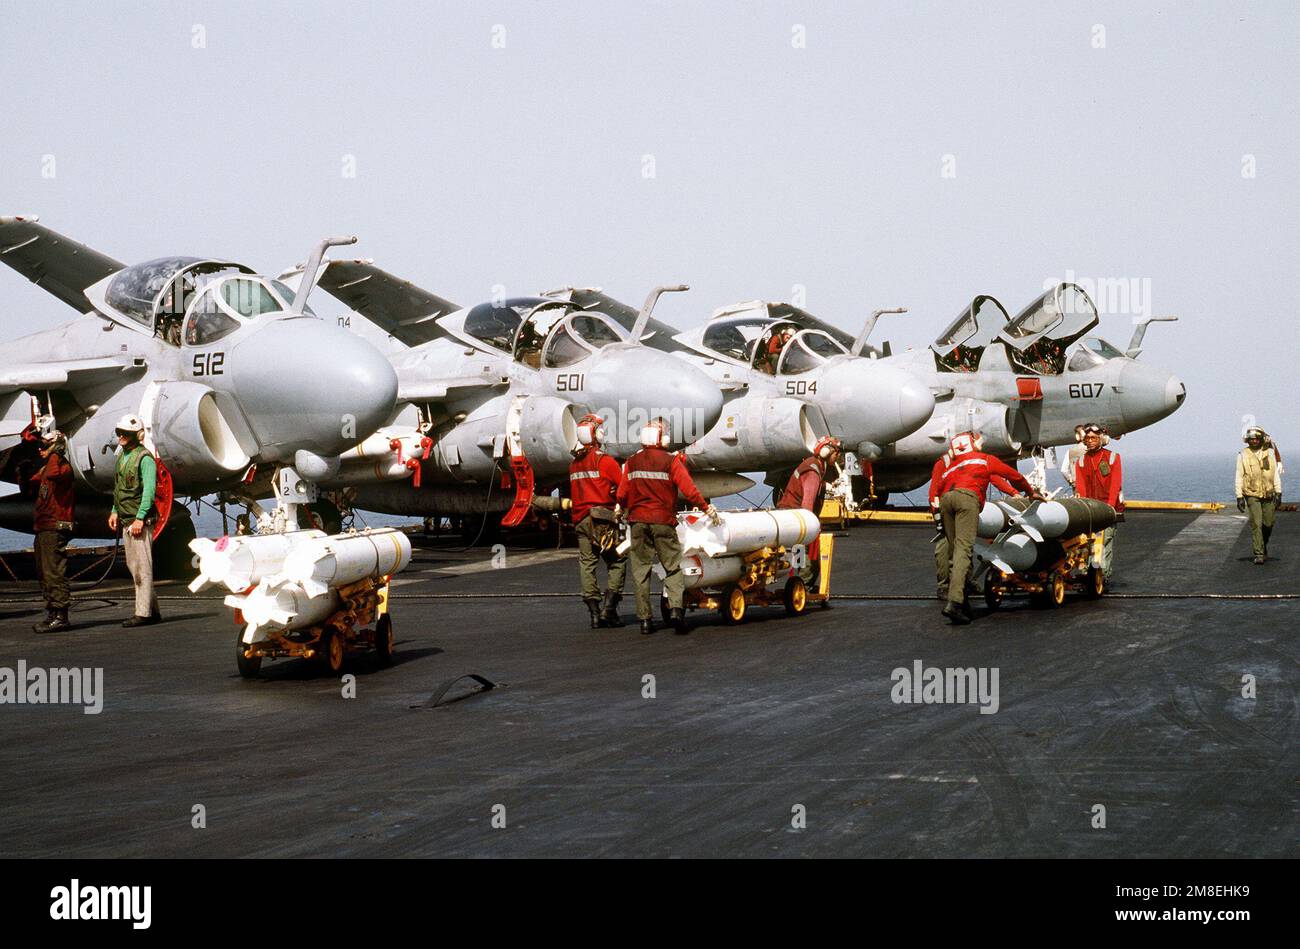 Aviation ordnancemen deliver two skids of Mark 20 Rockeye II cluster bombs, left and center, and a skid of general-purpose bombs to the area in front of three Attack Squadron 35 (VA-35) A-6E Intruder aircraft on the flight deck of the aircraft carrier USS SARATOGA (CV-60) during Operation Desert Storm. An EA-6B Prowler aircraft is at right. Subject Operation/Series: DESERT STORM Country: Red Sea Stock Photo